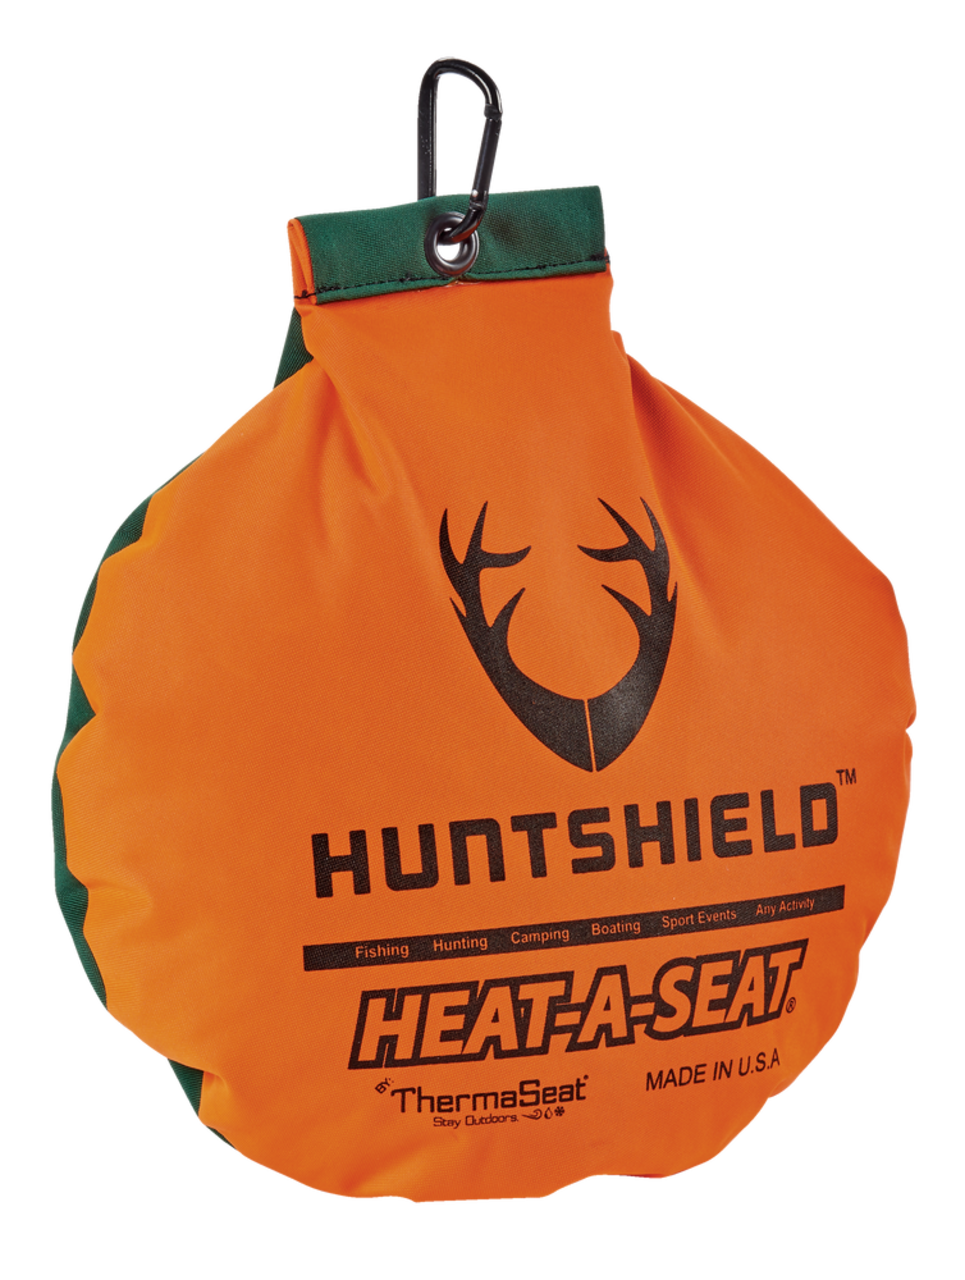 https://media-www.canadiantire.ca/product/playing/hunting/hunting-accessories/0755746/deluxe-heat-a-seat-green-blaze-44c43806-fe44-440d-af9f-b14b2826bf47.png?imdensity=1&imwidth=640&impolicy=mZoom